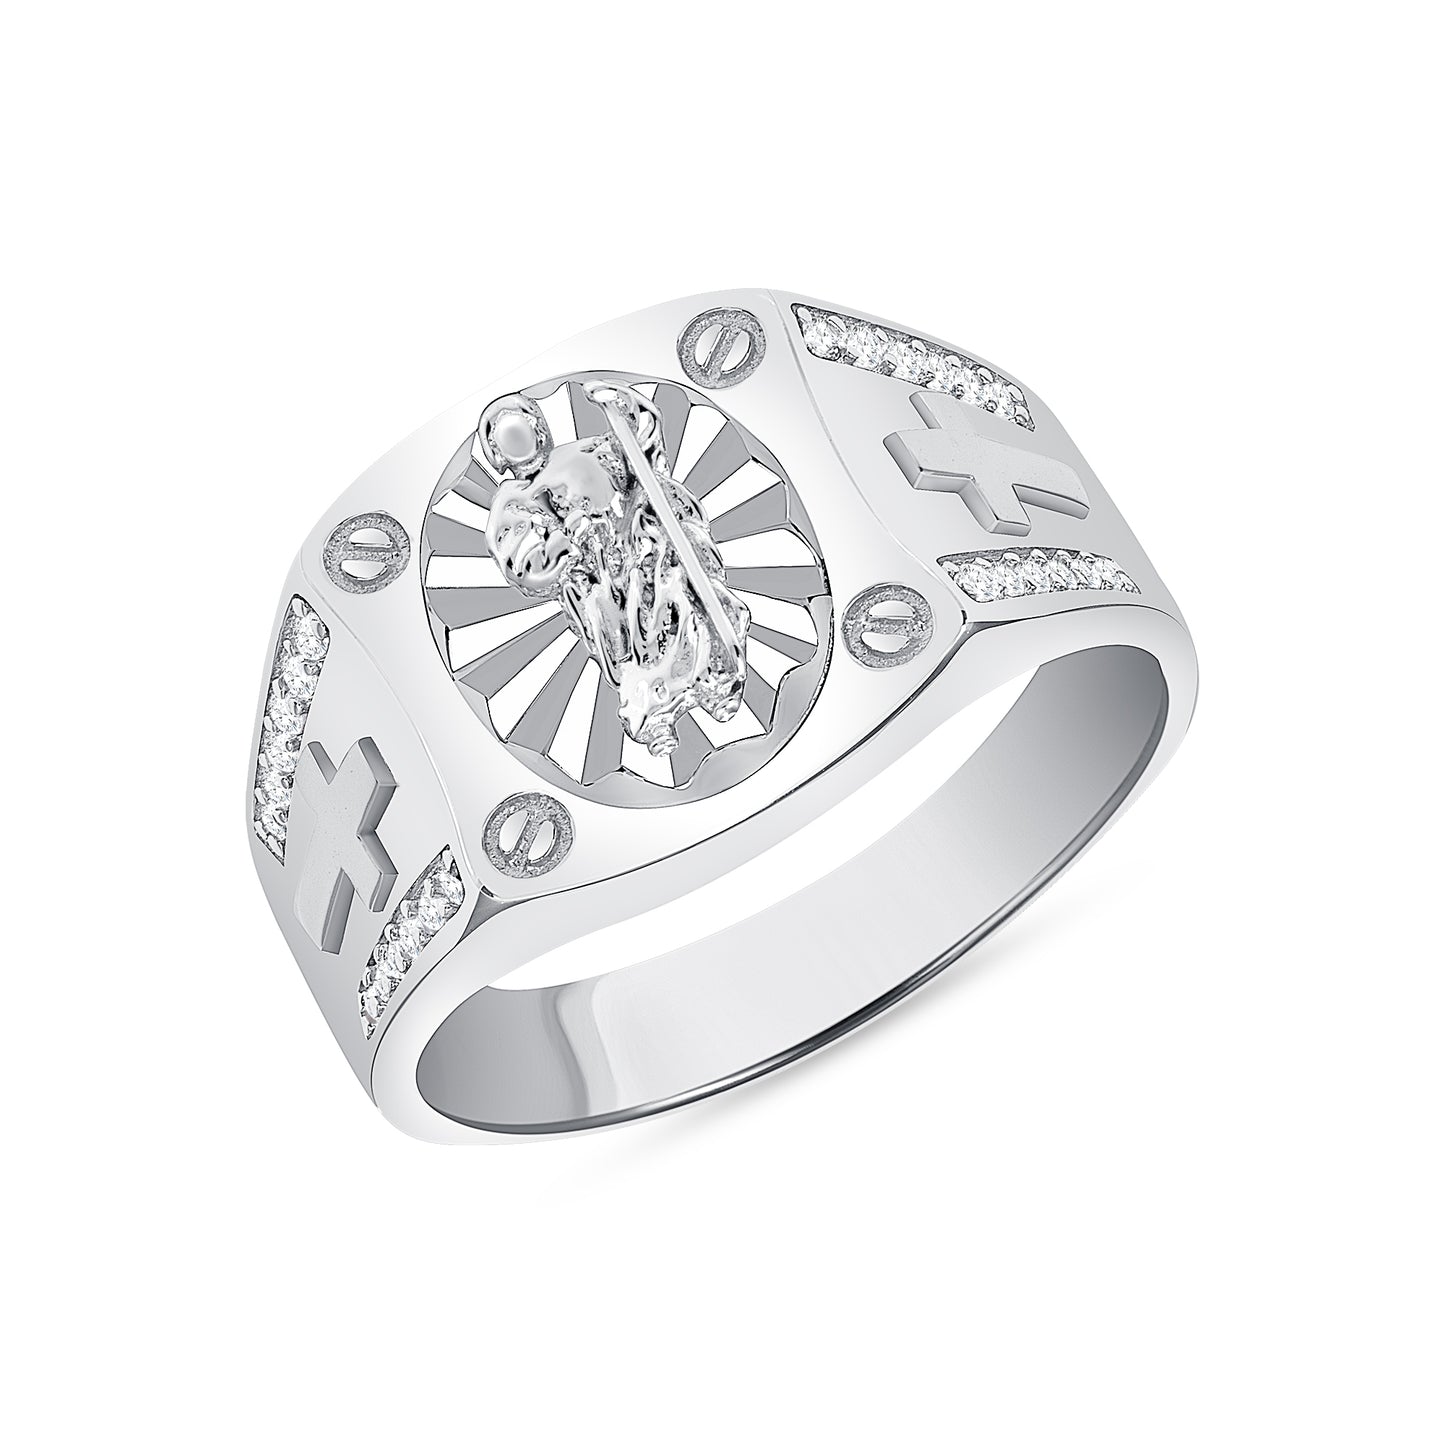 Silver 925 Rhodium Plated Saint Jude Side Cross with Cubic Zirconia Men's Ring. GR10711